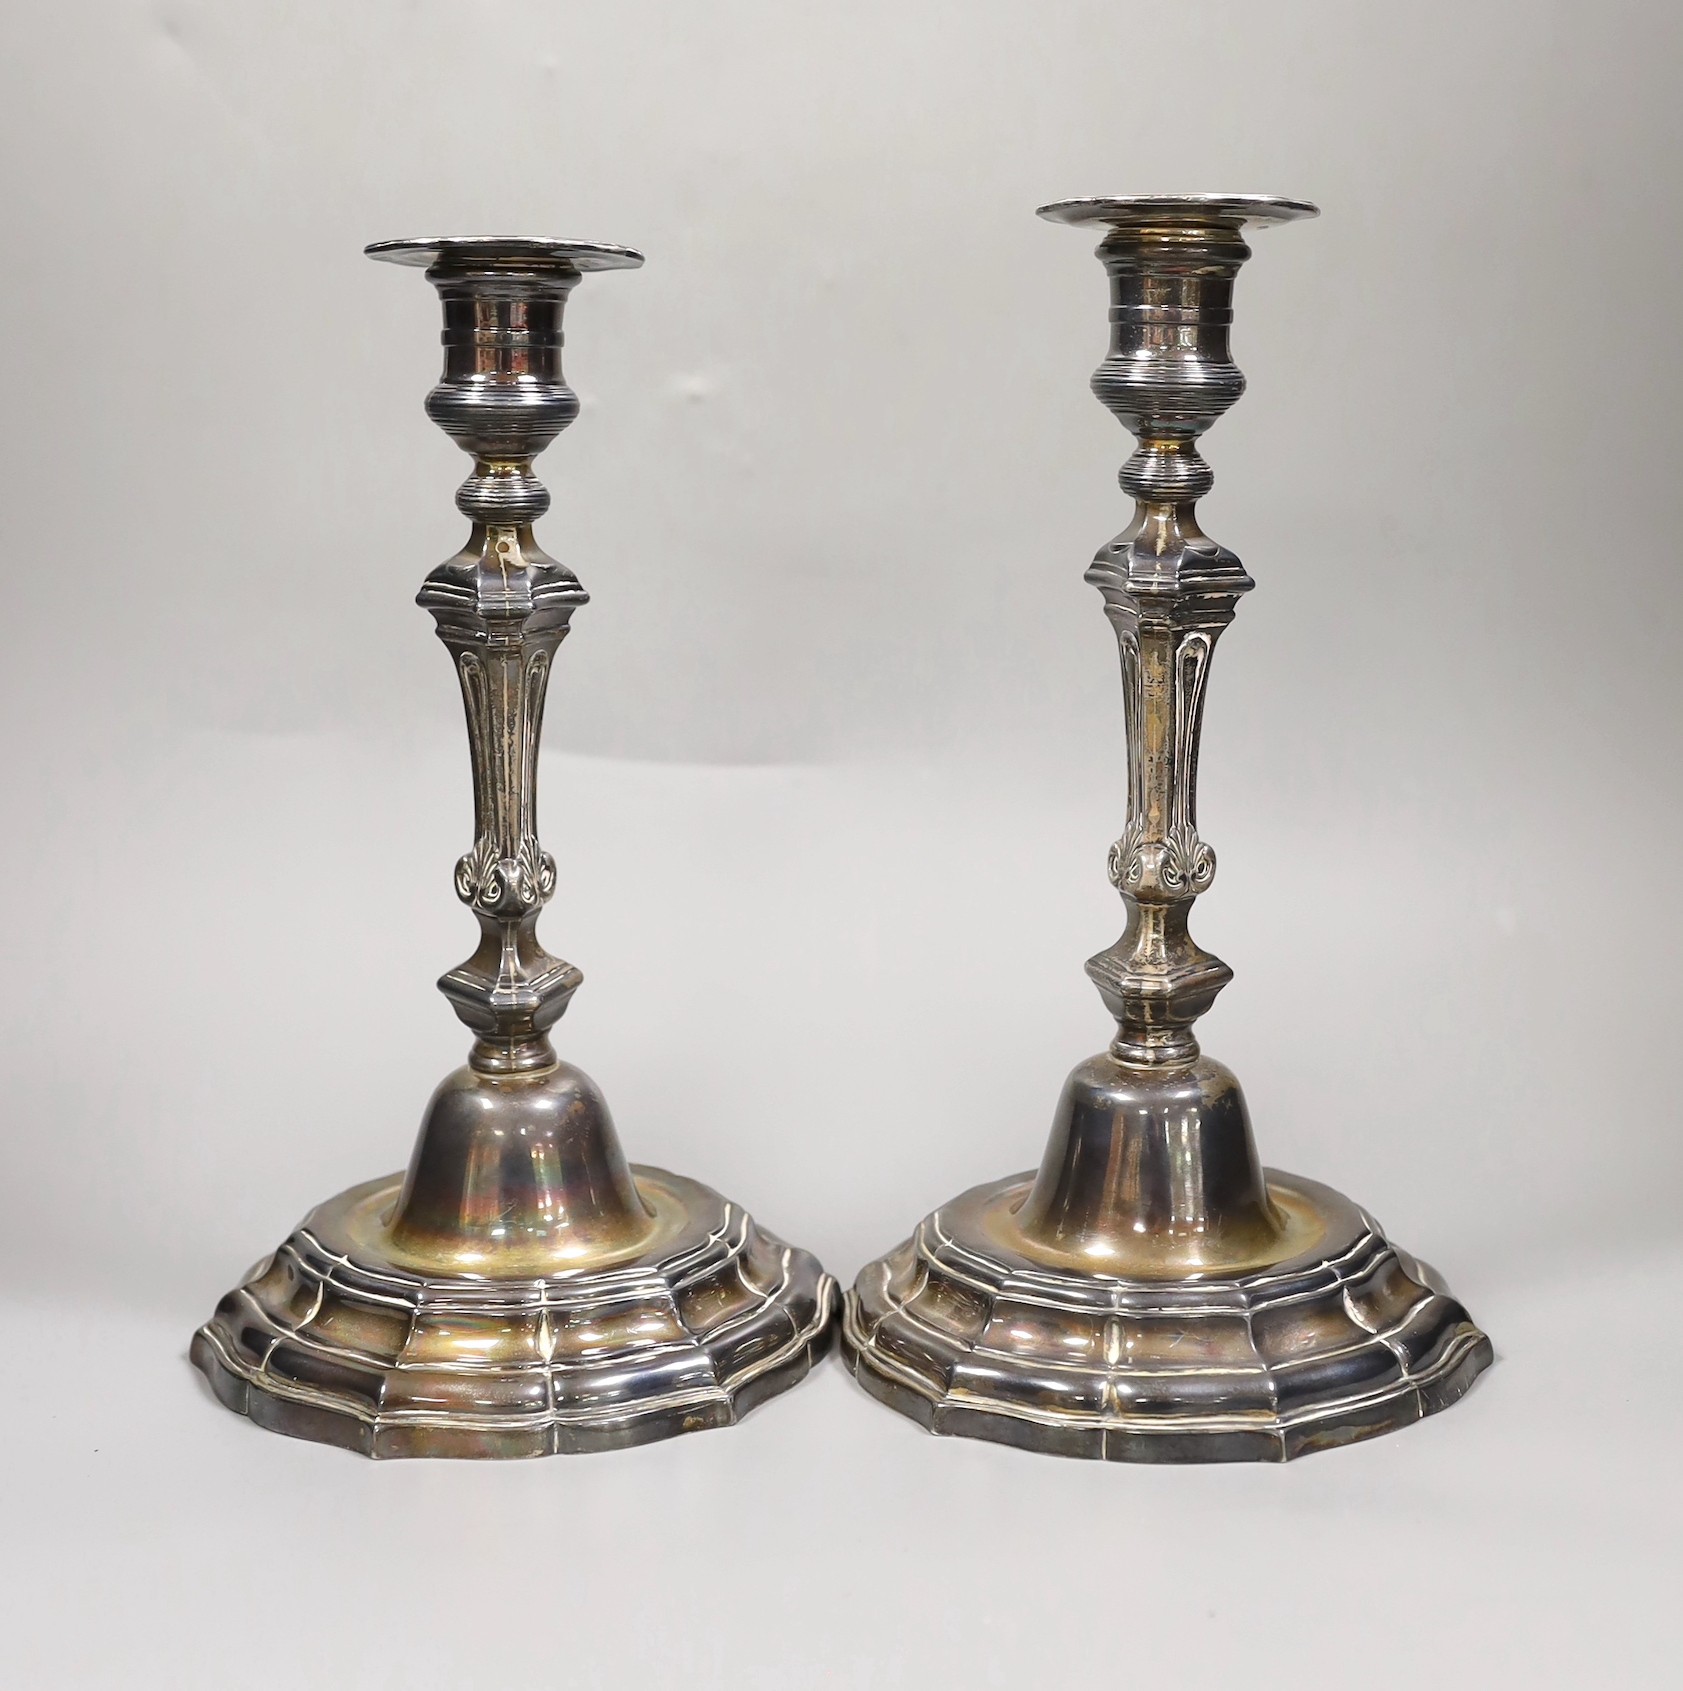 A pair of French Louis XVI cast white metal candlesticks and sconces, with waisted knopped stems, on shaped circular bases, maker, Jean Schoutheer, Dunkirk mark, circa 1775, height 26.2cm, 36oz.